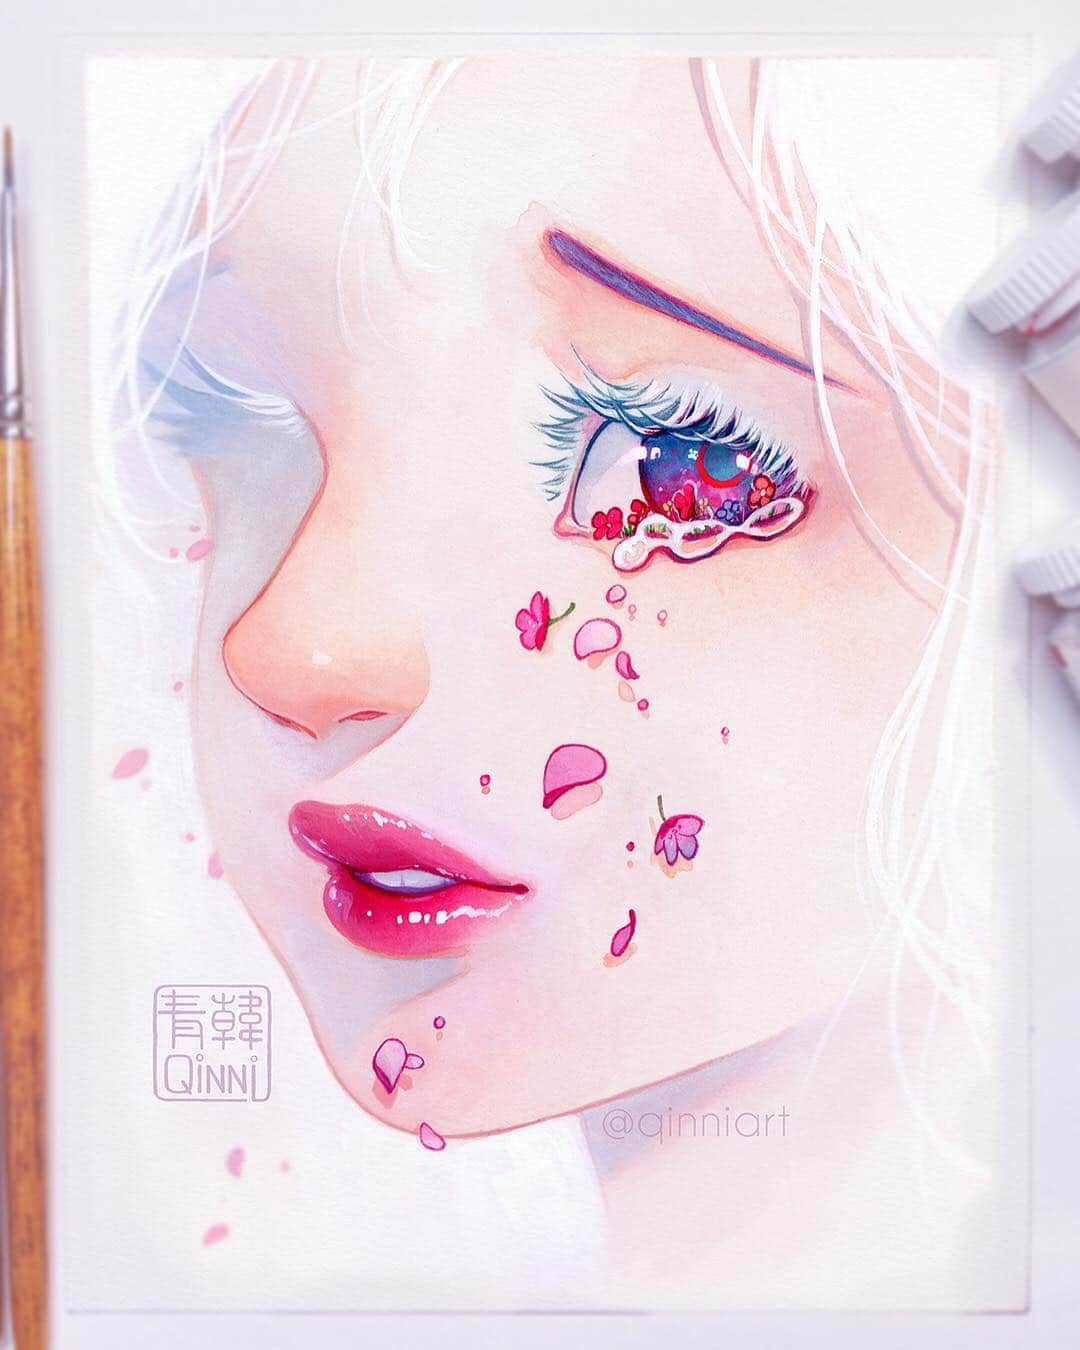 Qing Hanのインスタグラム：「Flower drops💧🌸 • • • This was an gouache+watercolour experiment on hot-press watercolour paper, since I've never used hot-press before, and it really kinda morphed from just an eye into a full face sorta lmao ~ I filmed the process for this painting, though editing takes such a long time I'm not sure if I'm up to it, since my back pain is pretty bad. Also, I found out the reason for my back pain is cause of my heart surgeries hahaha. Apparently during open heart surgery, they kinda bend the ribs open and since the rib goes around to the back and the spine, it can fuck up the back. Sometimes ribs can even be broken so the surgeon can get to the heart better...so yeah, massages doesn't really help me anymore either so that's fun lol. I kinda want to try topical cannabis oil haha. I'll ask the next time I see my cardiologist. I already got the ok from the pre-transplant clinic cardiologist, but it's always good to make sure :p Thanks for sticking around guys :3 • • • #painting #illustration #flowers #tears #watercolor」